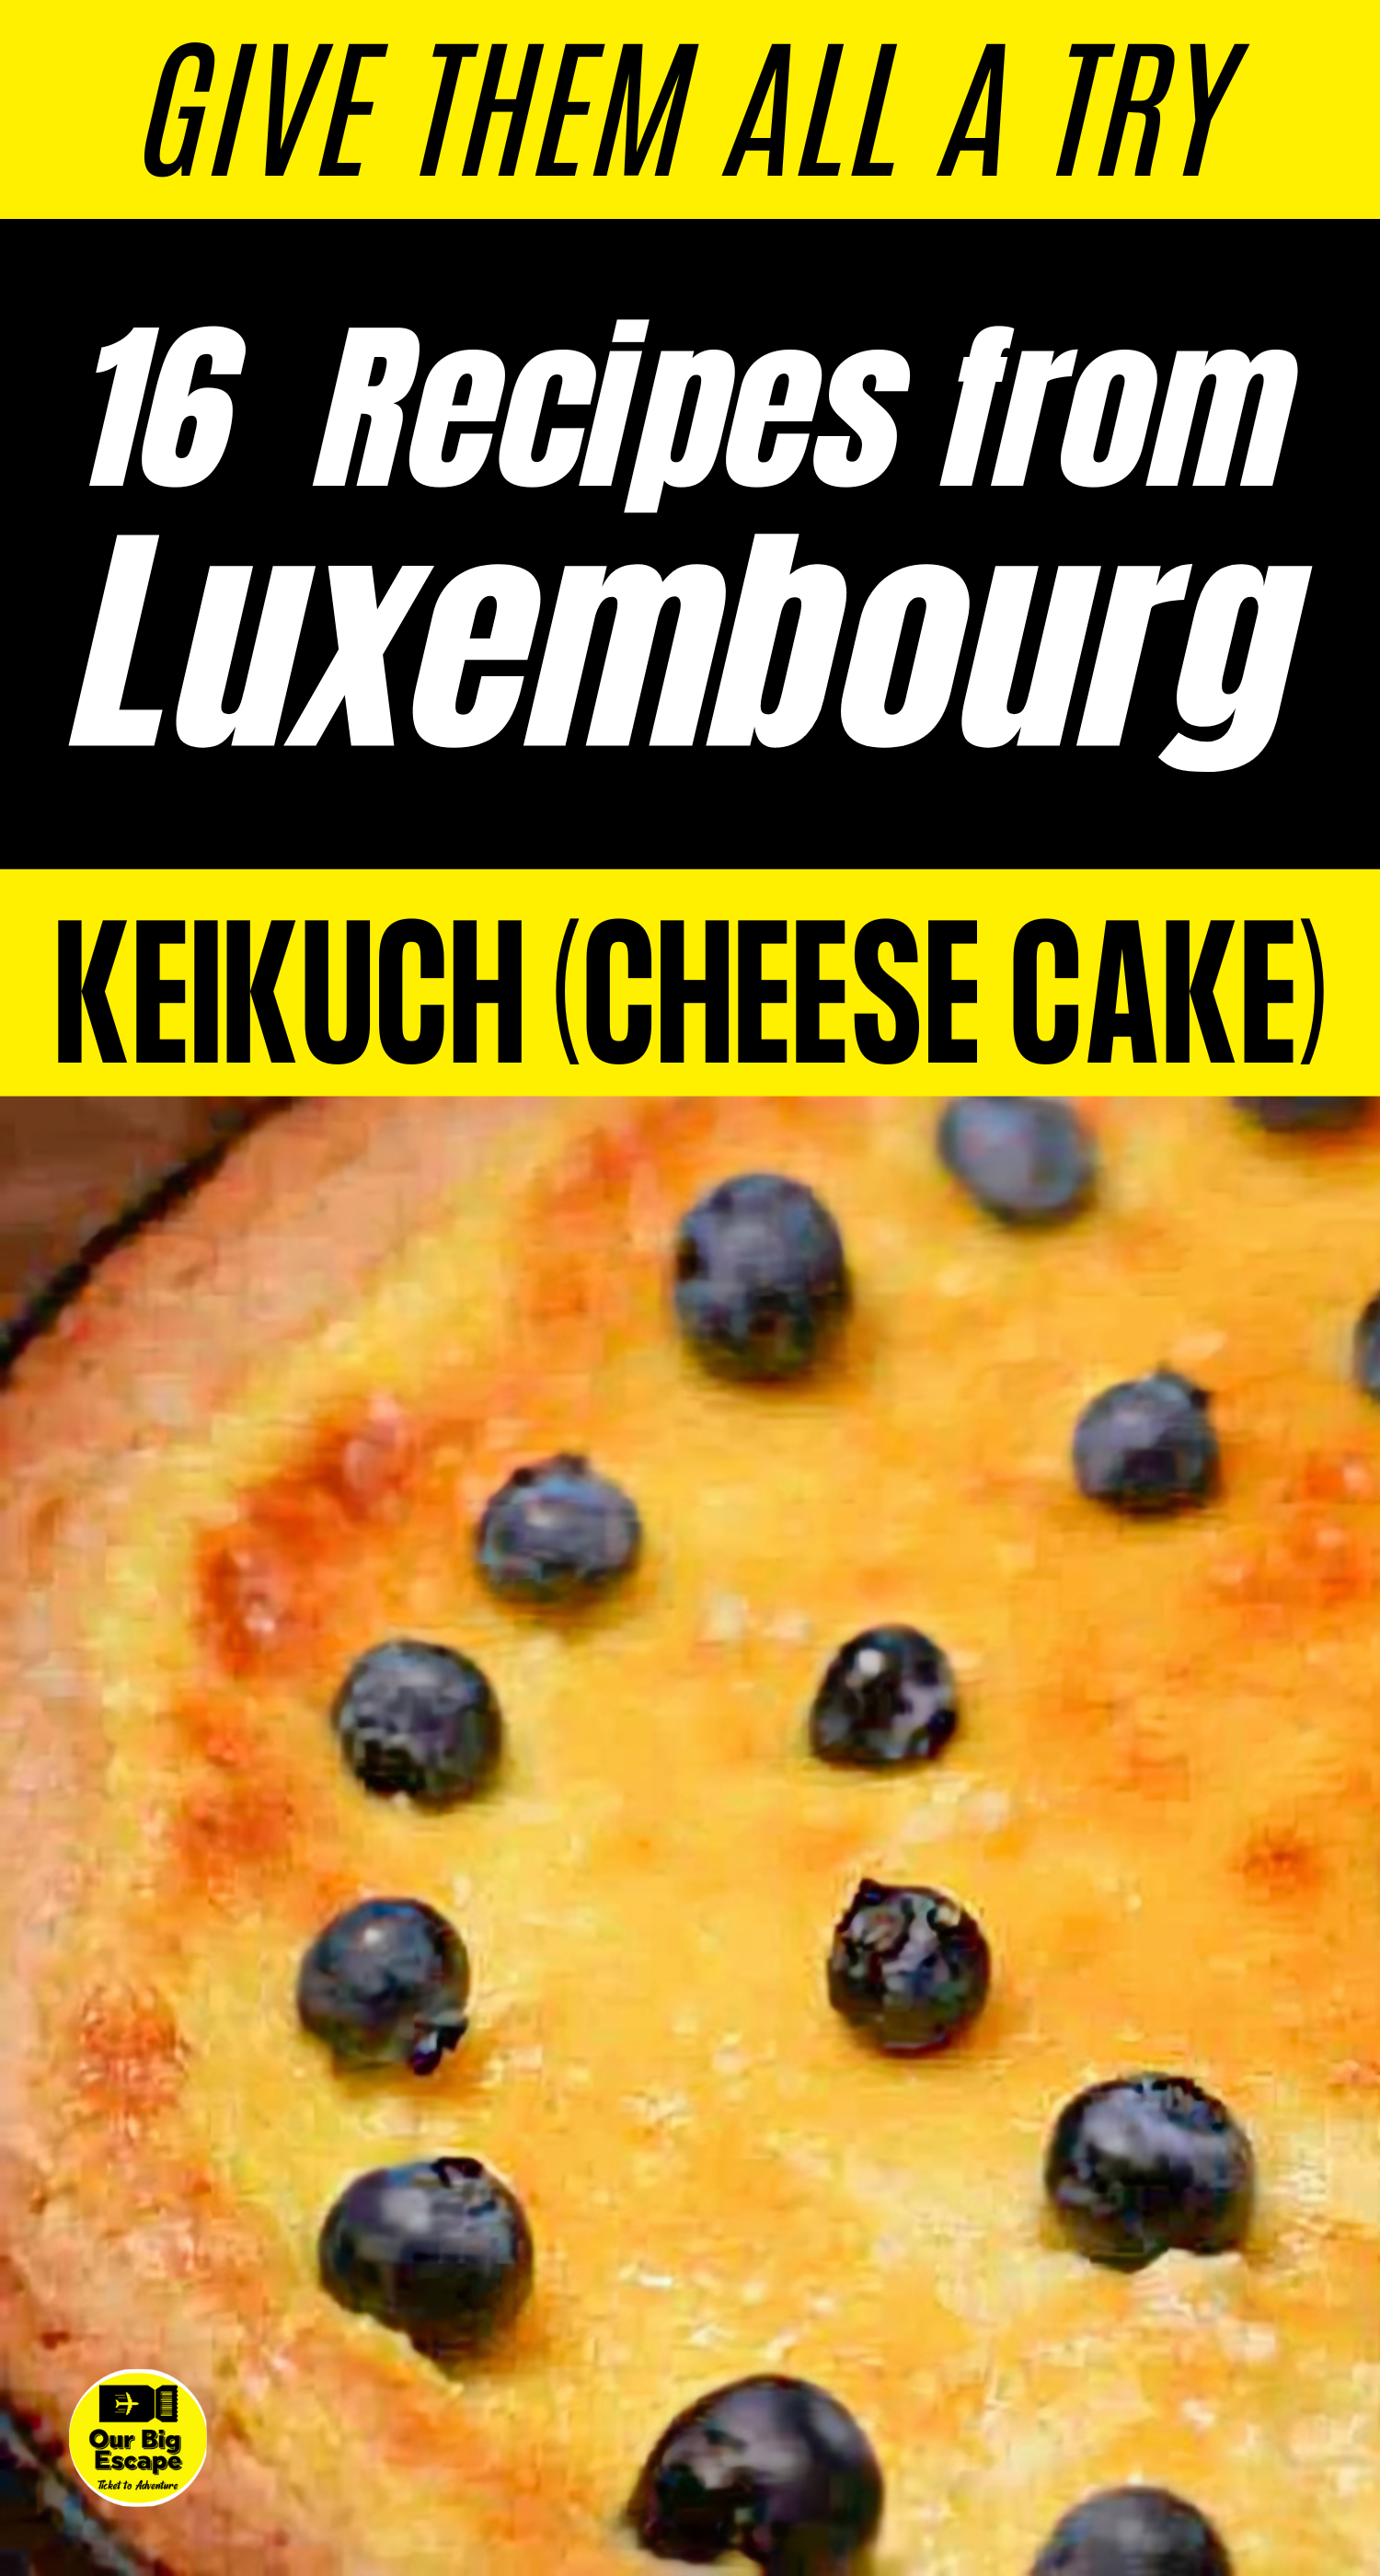 16 Luxembourg Recipes - Keikuch (Cheese Cake)